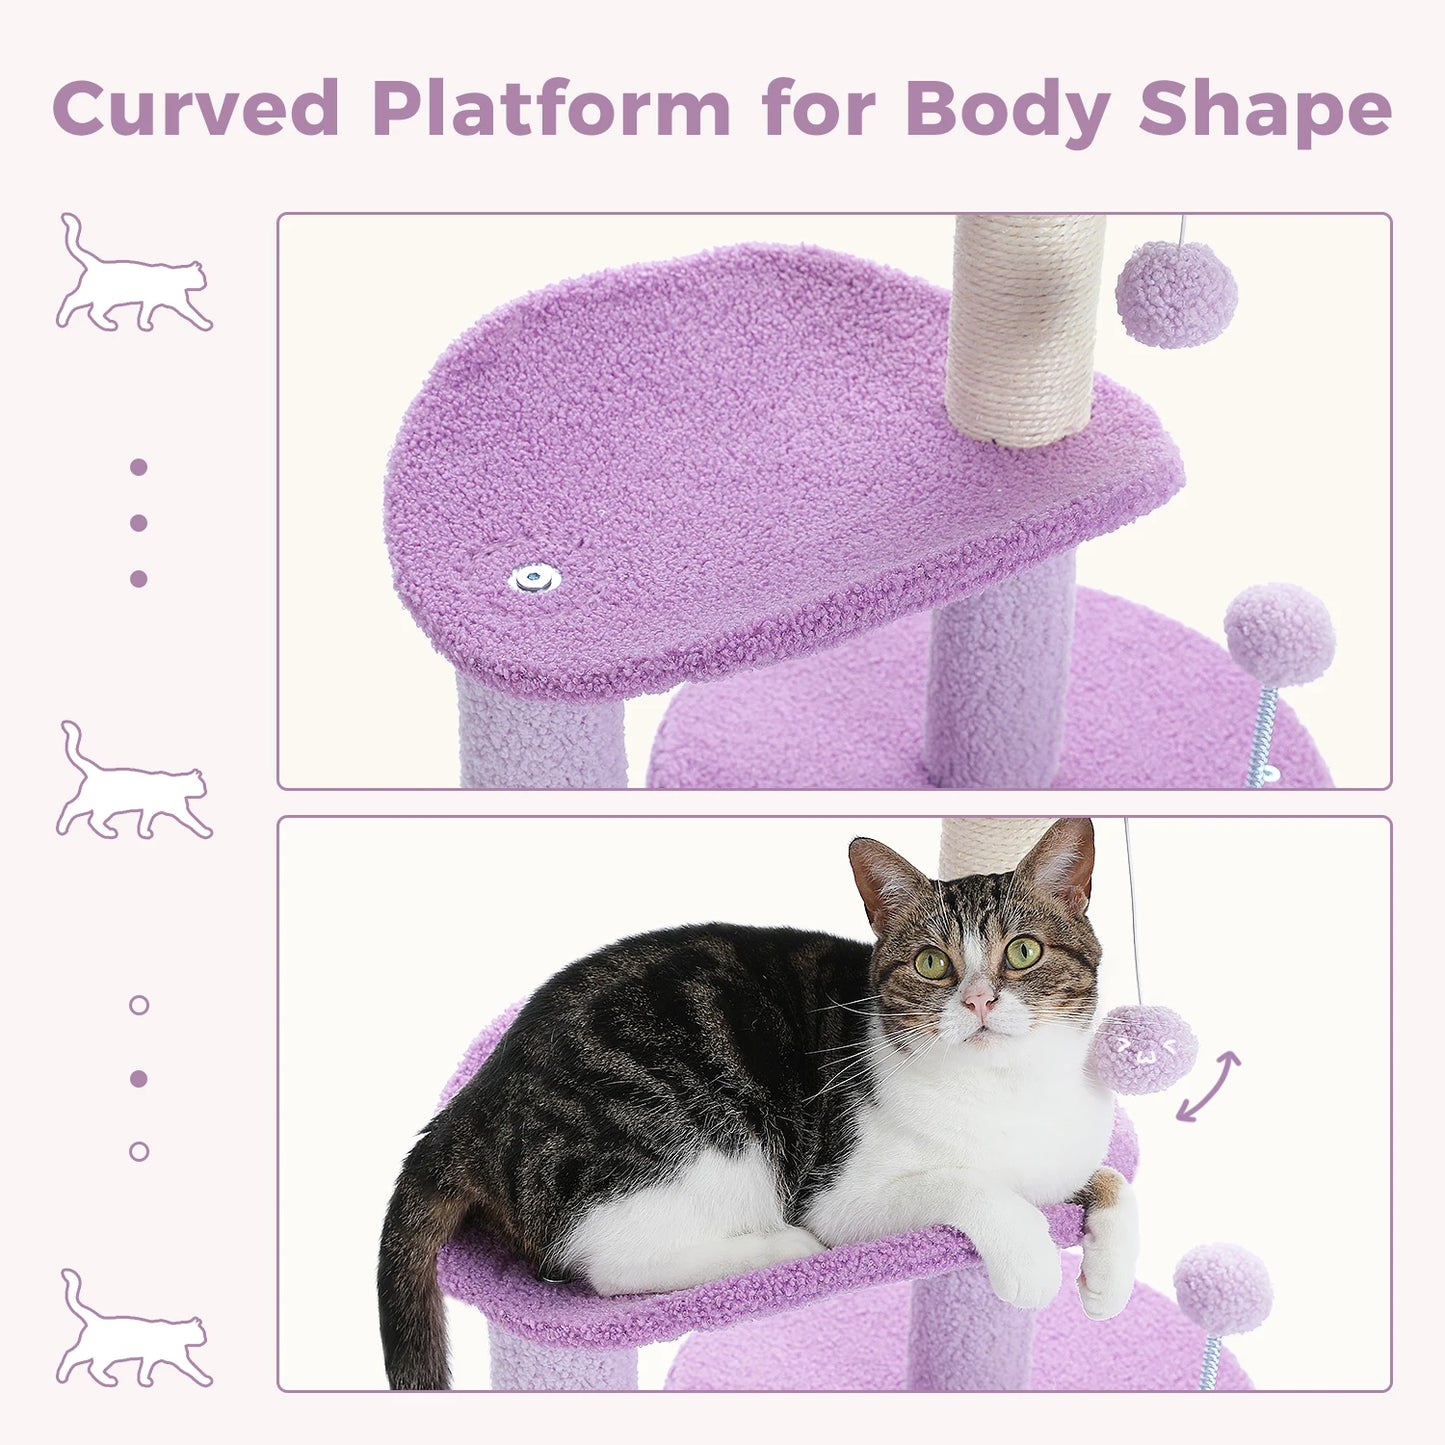 84cm Petite Floral Cat Tree in Purple - Perfect for Kittens and Small Cats